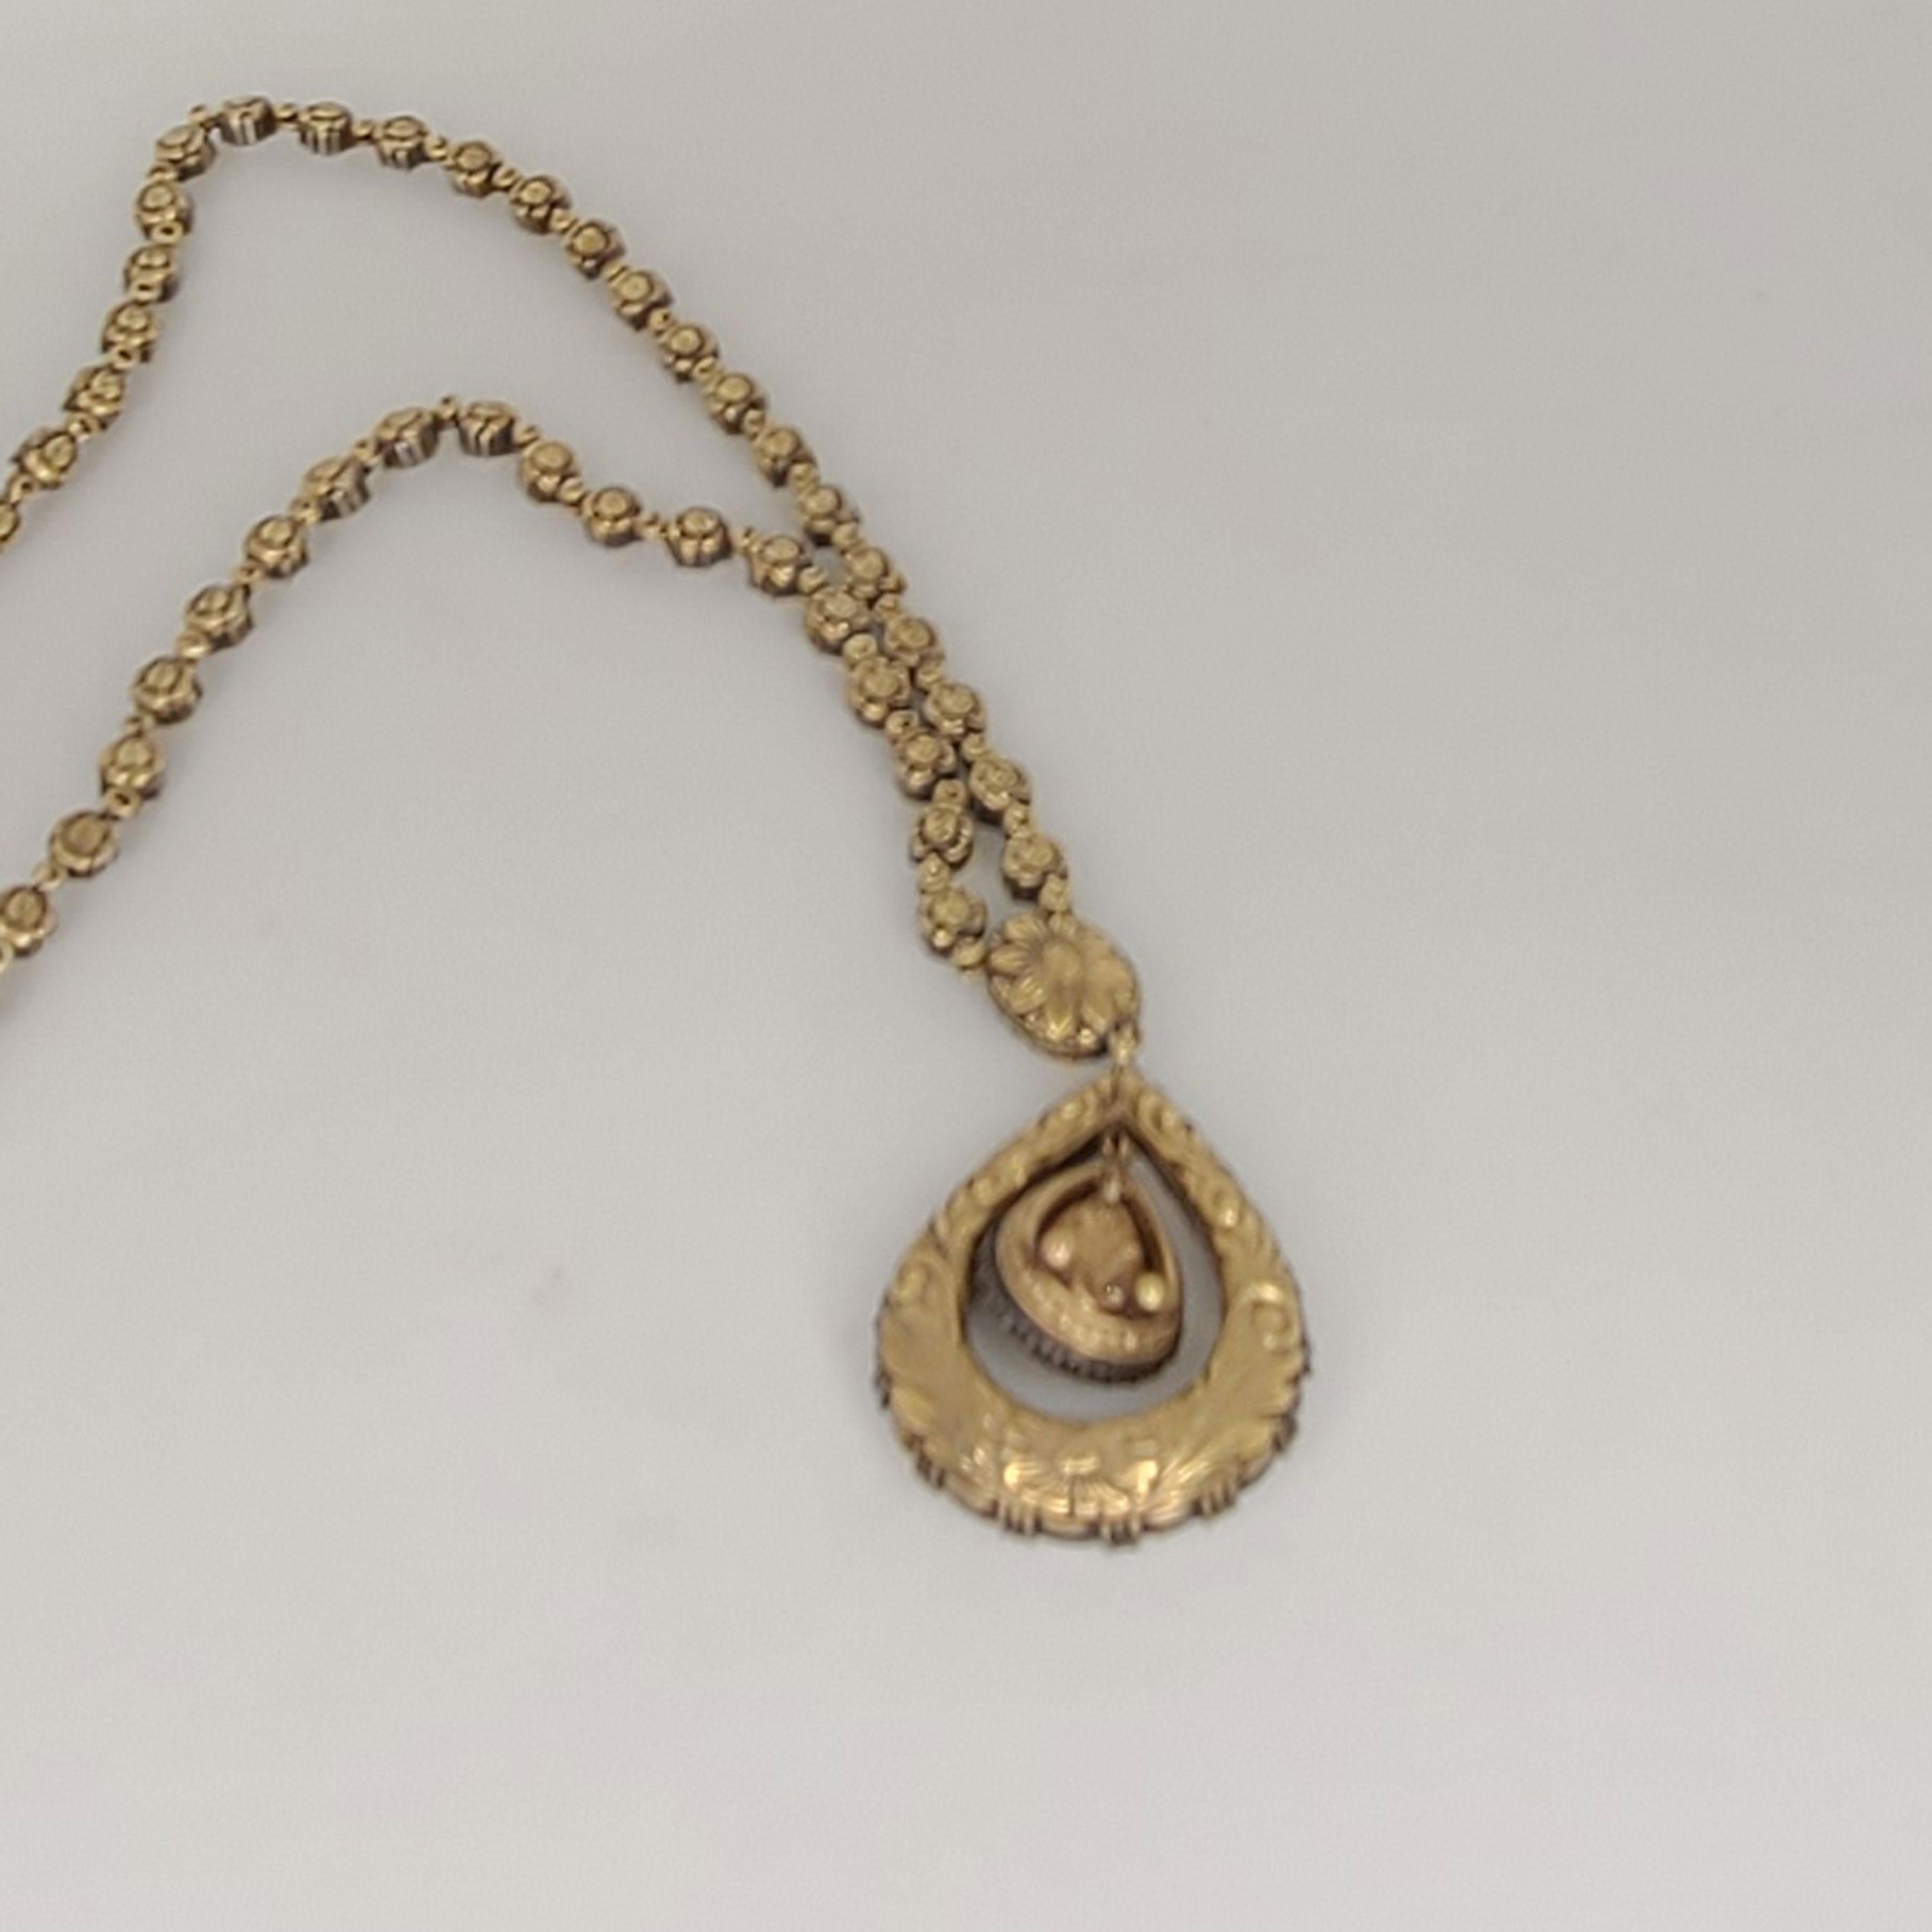 This one of a kind 18K Gold Necklace has a pear shape rose-cut Diamonds of 1.36cts. The rest of the rose-cut Diamonds are 9.71 cts. This necklace is 16 inches long. it is made in 18K Gold, however the rose-cut Diamonds are set on a sterling silver